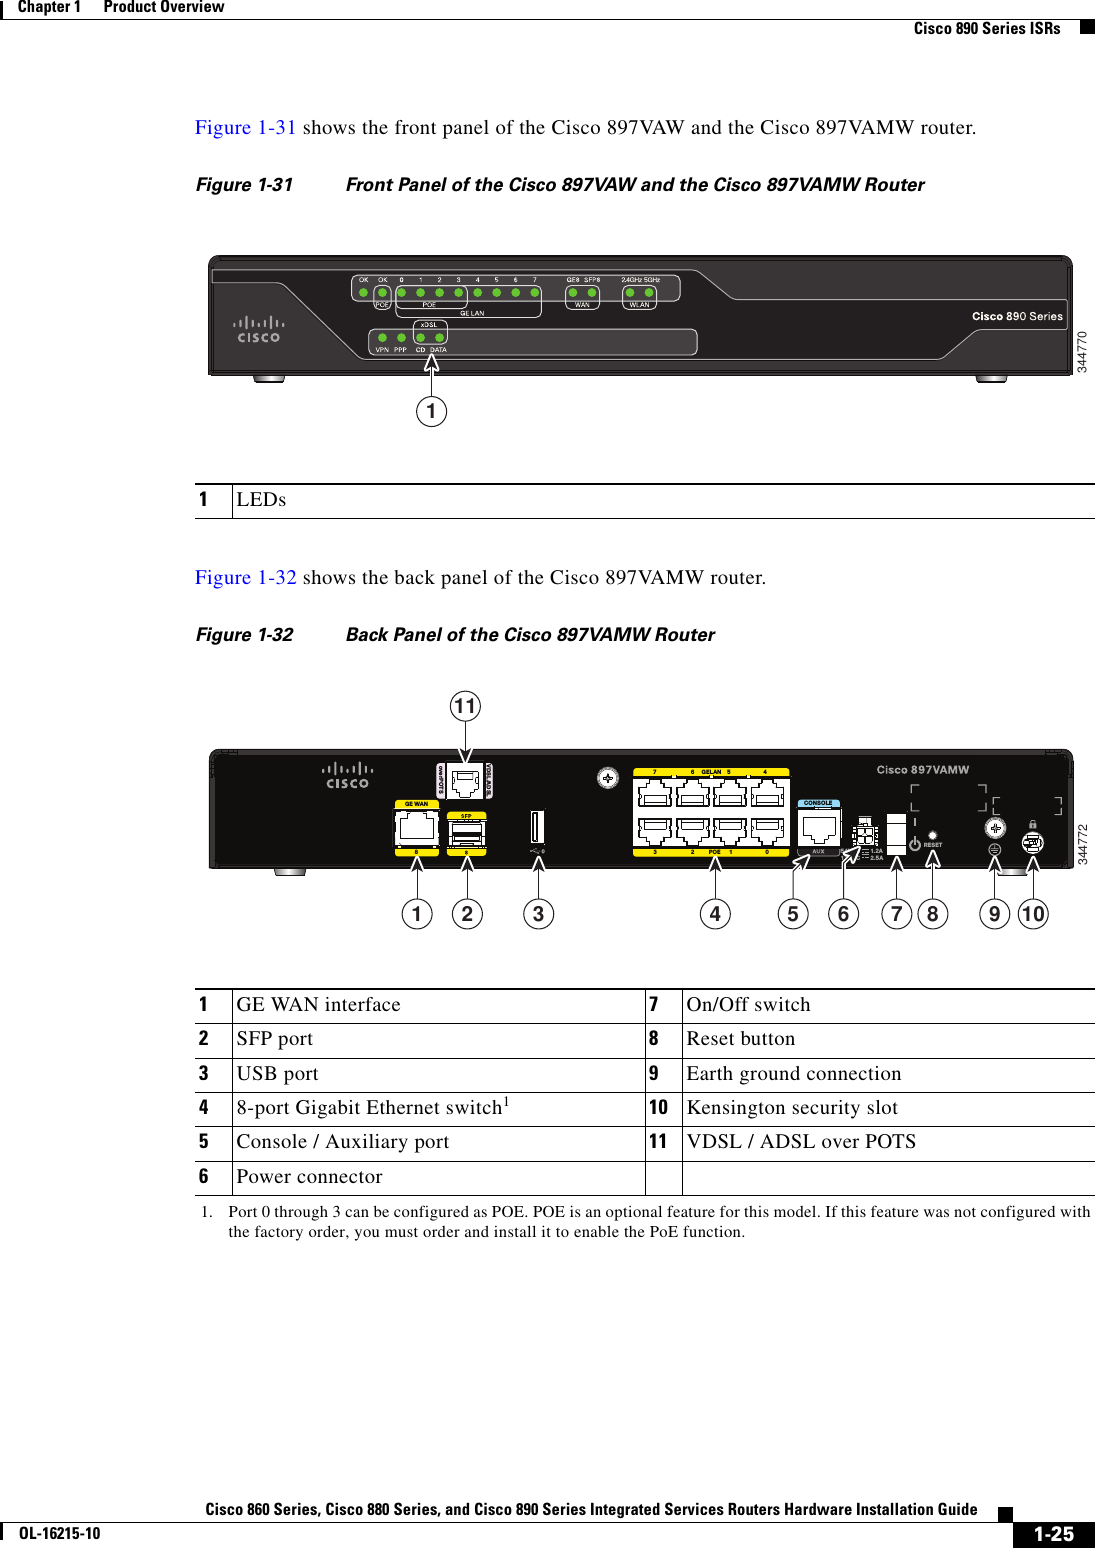  1-25Cisco 860 Series, Cisco 880 Series, and Cisco 890 Series Integrated Services Routers Hardware Installation GuideOL-16215-10Chapter 1      Product Overview  Cisco 890 Series ISRsFigure 1-31 shows the front panel of the Cisco 897VAW and the Cisco 897VAMW router. Figure 1-31 Front Panel of the Cisco 897VAW and the Cisco 897VAMW RouterFigure 1-32 shows the back panel of the Cisco 897VAMW router. Figure 1-32 Back Panel of the Cisco 897VAMW Router13447701LEDs     7                        6     GELAN    5                       4    3                        2          POE      1                       08GE WAN54VDC       1.2A12VDC       2.5AVDSL/ADSLoverPOTSCONSOLERESET344772111 2 34 7 89 105 61GE WAN interface 7On/Off switch2SFP port 8Reset button3USB port 9Earth ground connection48-port Gigabit Ethernet switch110 Kensington security slot5Console / Auxiliary port 11 VDSL / ADSL over POTS6Power connector1. Port 0 through 3 can be configured as POE. POE is an optional feature for this model. If this feature was not configured with the factory order, you must order and install it to enable the PoE function.